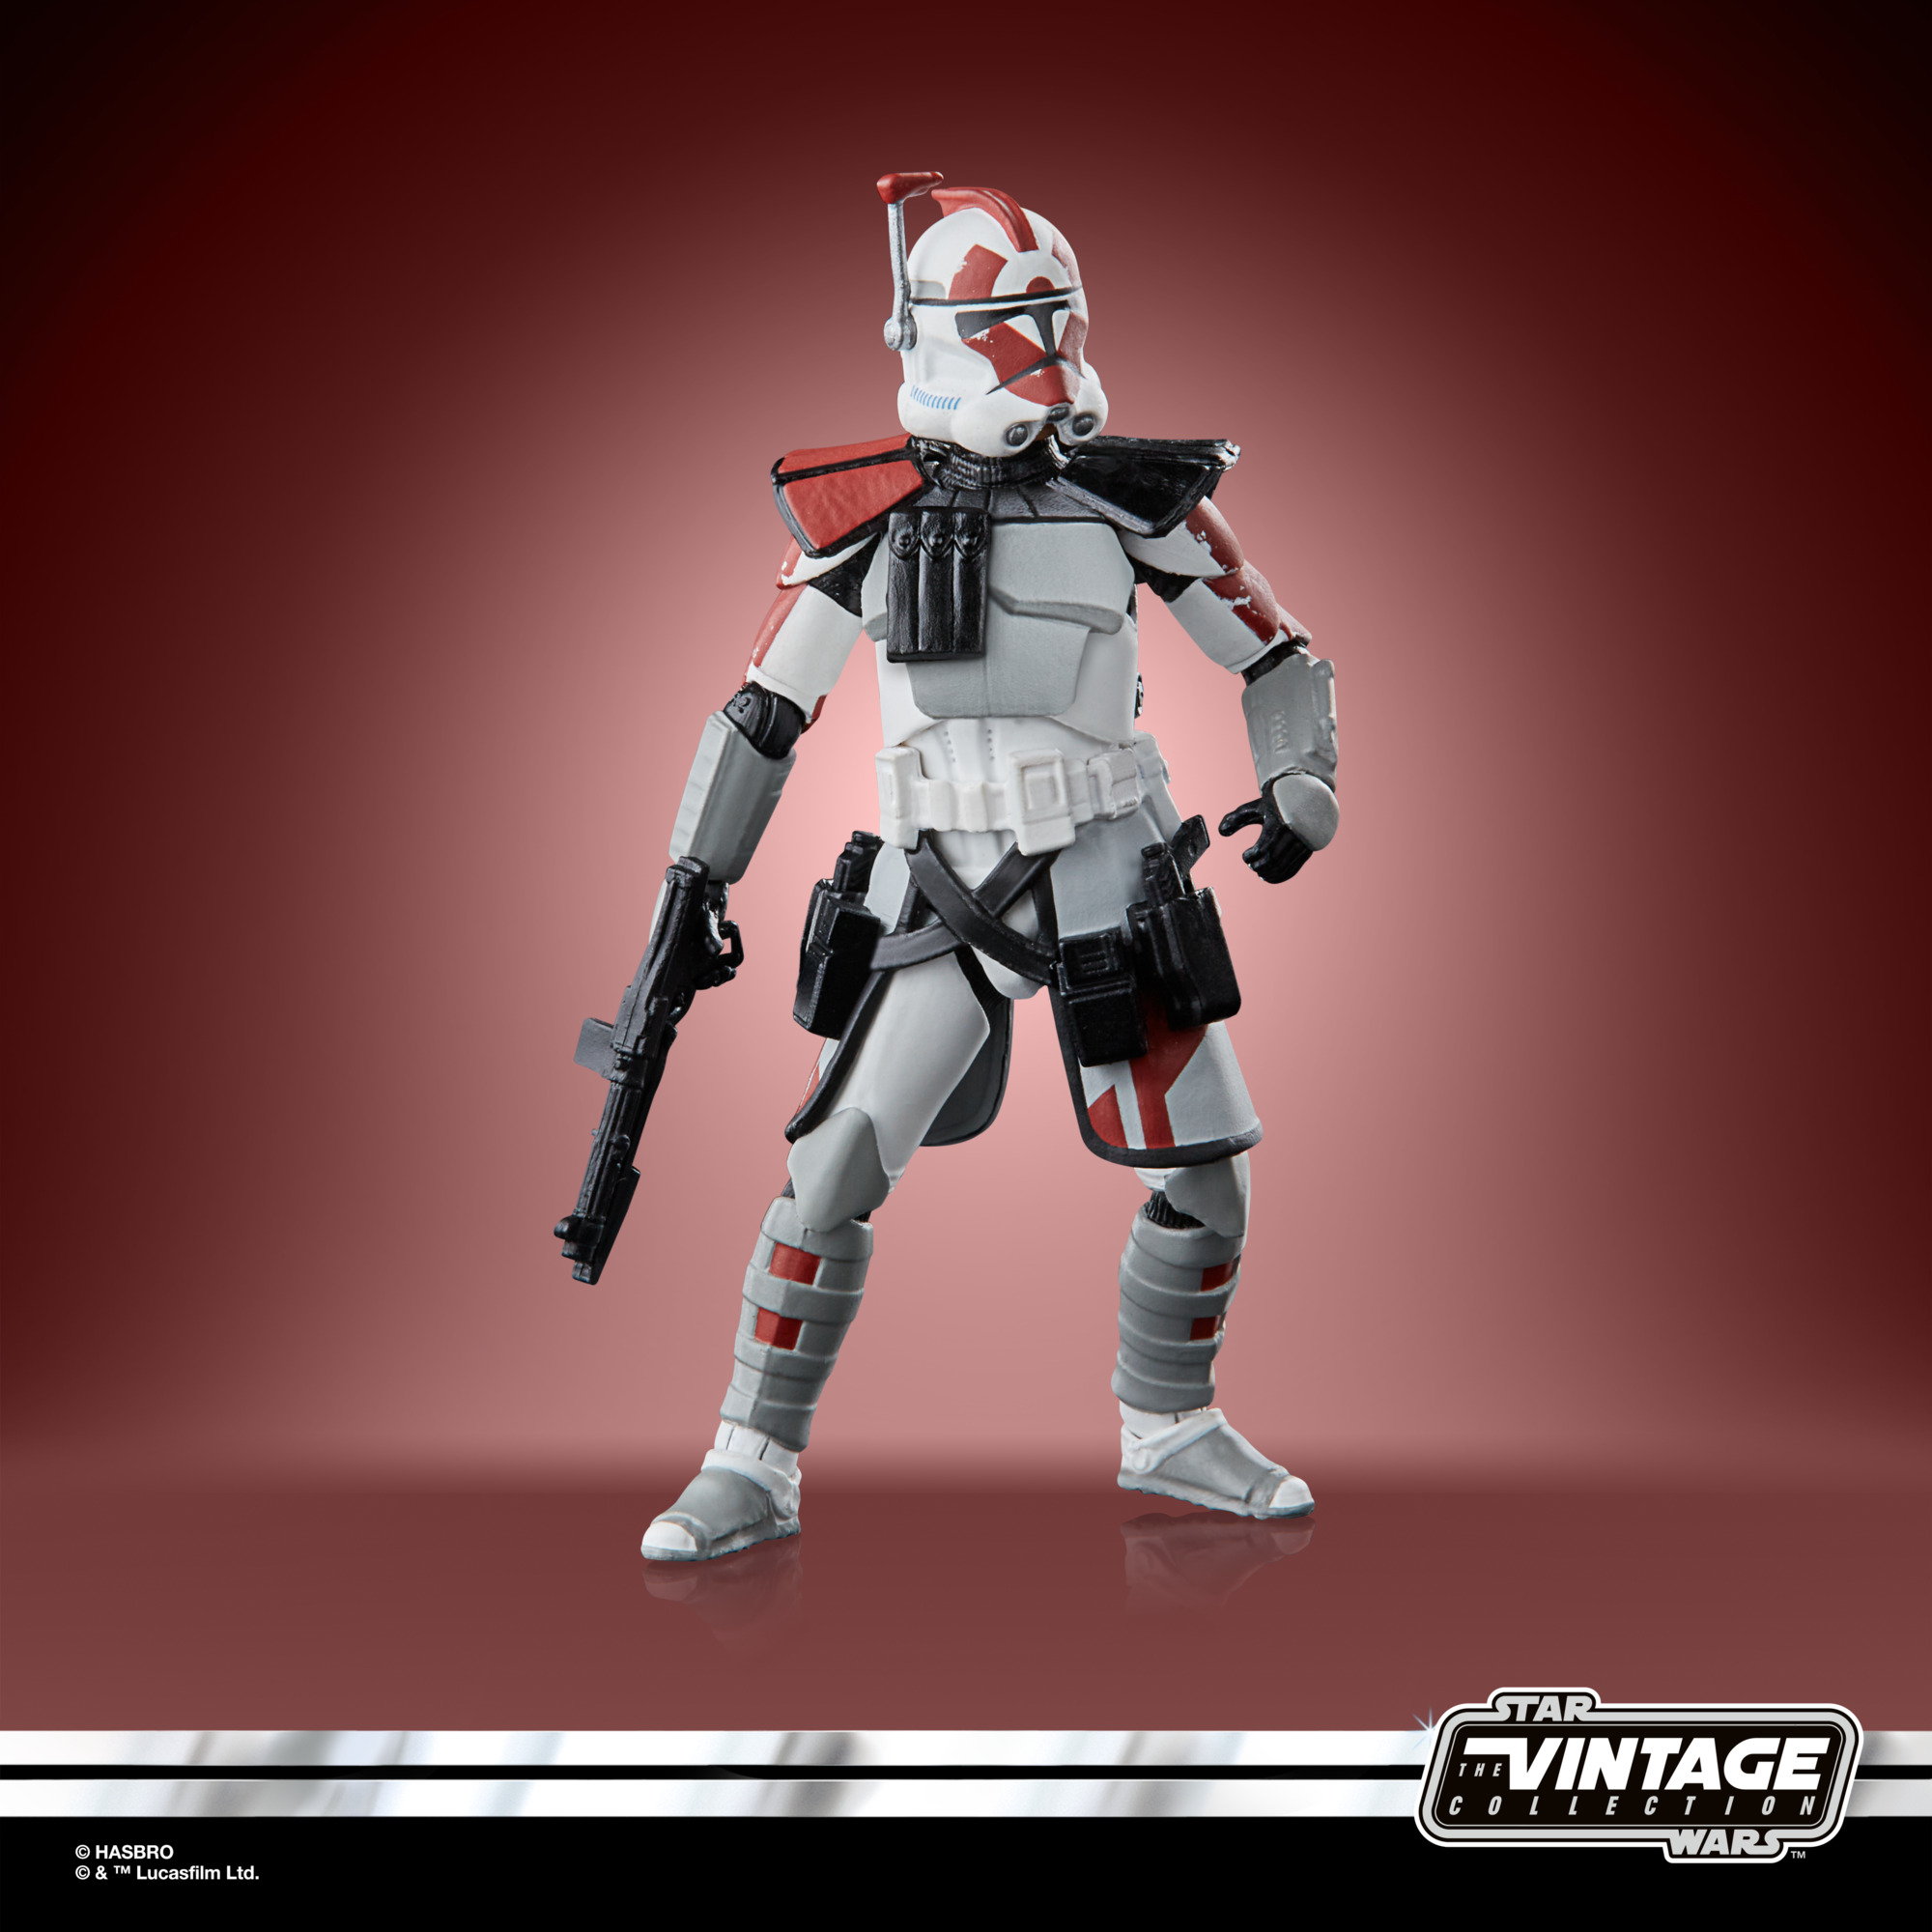 Star Wars The Vintage Collection Gaming Greats ARC Trooper (Star Wars Battlefront II) F62525L0 5010994151744